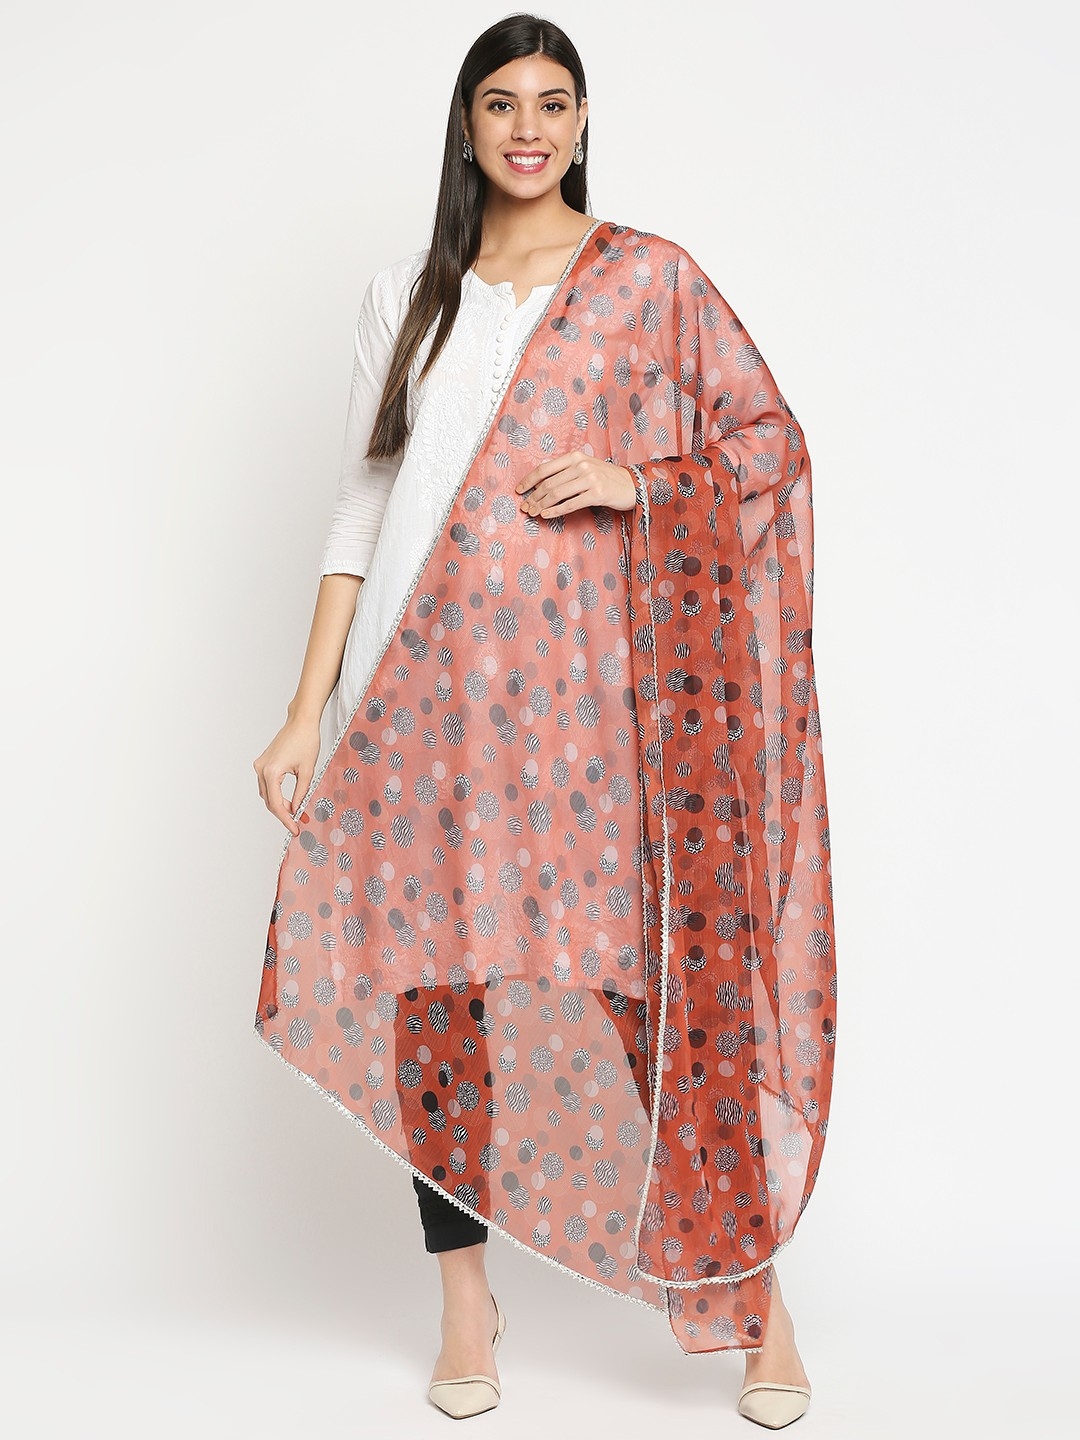 Get Wrapped | Get Wrapped Embroidered & Digital Printed Dupatta Combo for Women - Pack of 2 2